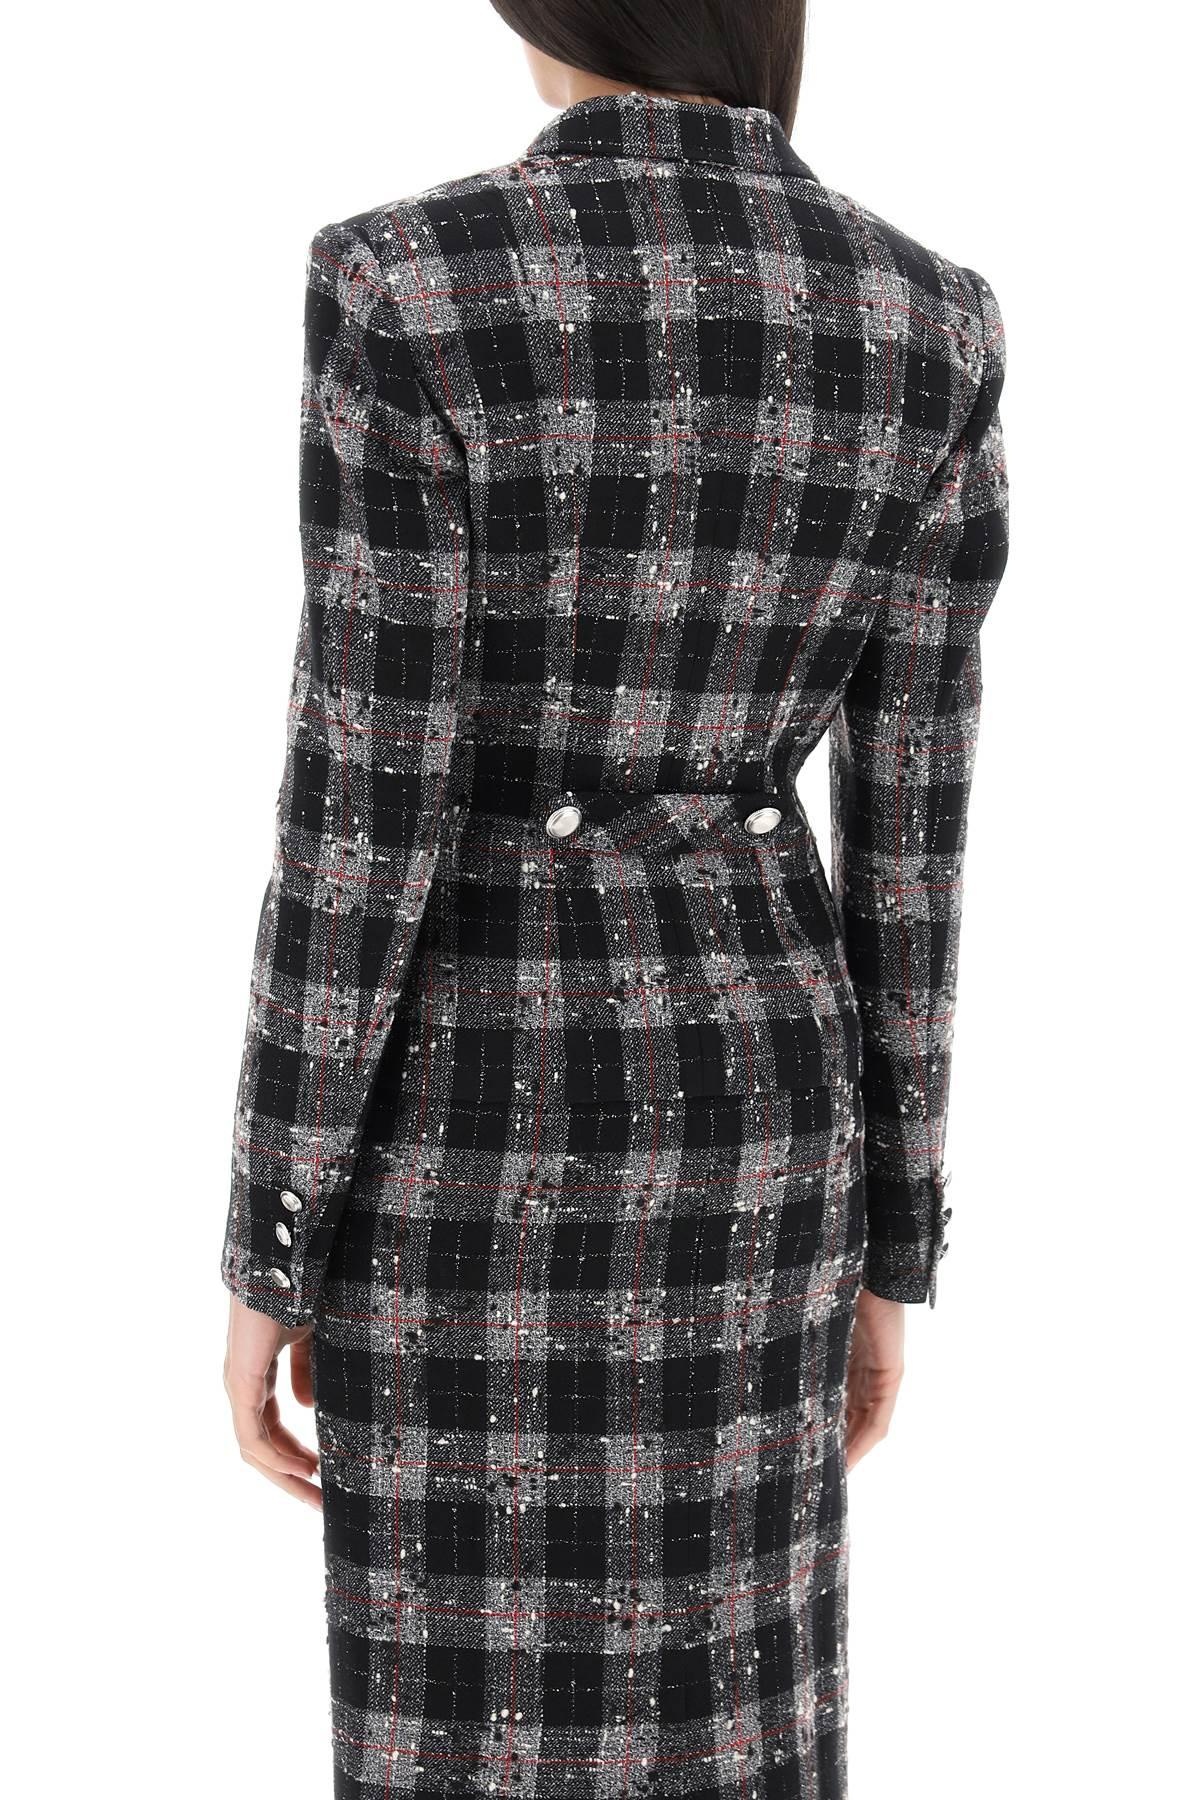 Alessandra Rich Single Breasted Jacket In Boucle' Fabric With Check Motif - 4